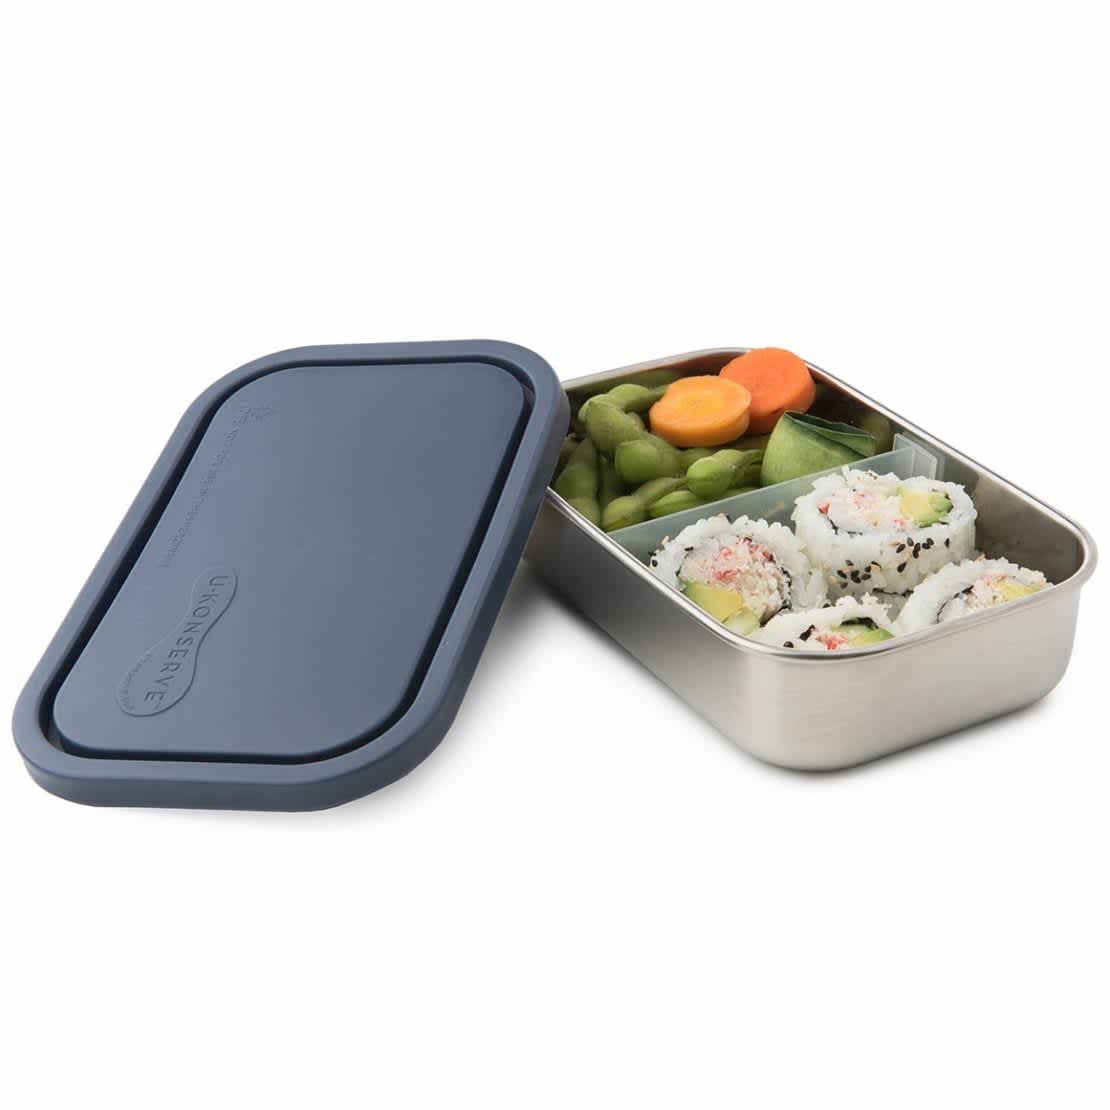 U-Konserve brand stainless steel rectangle food container with a center divider